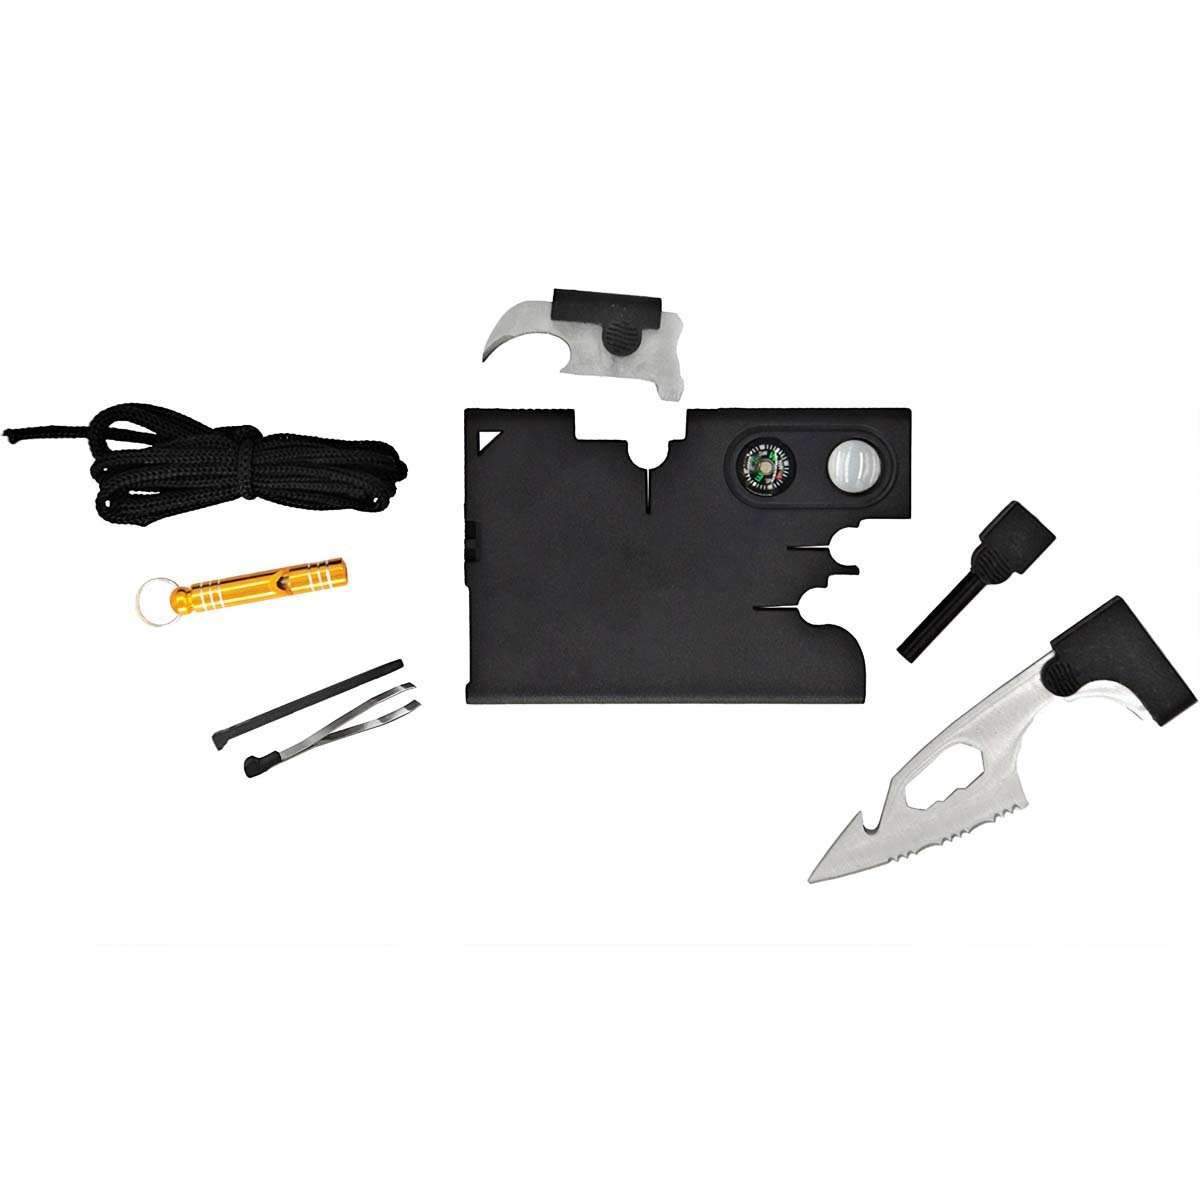 18 in 1 survival tool on a card - credit card sized survival tool kit Gifts Ivy and Pearl Boutique   